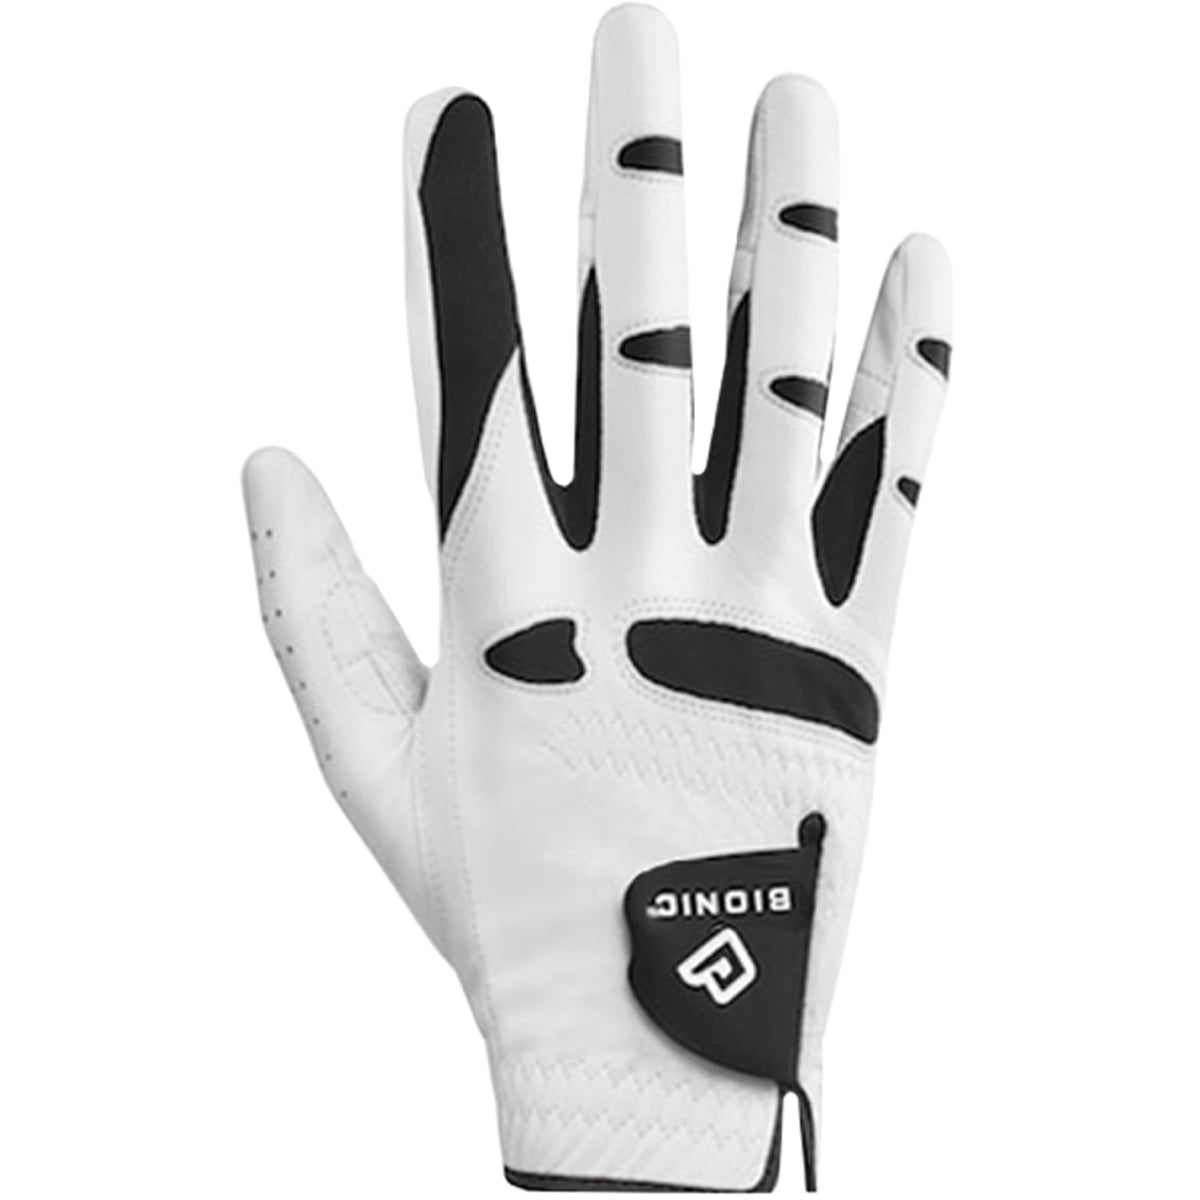 Copper Tech Gloves Men's Golf Glove with Honeycomb Grip, One Size,  White/Black Left Hand - Rooibok Sports